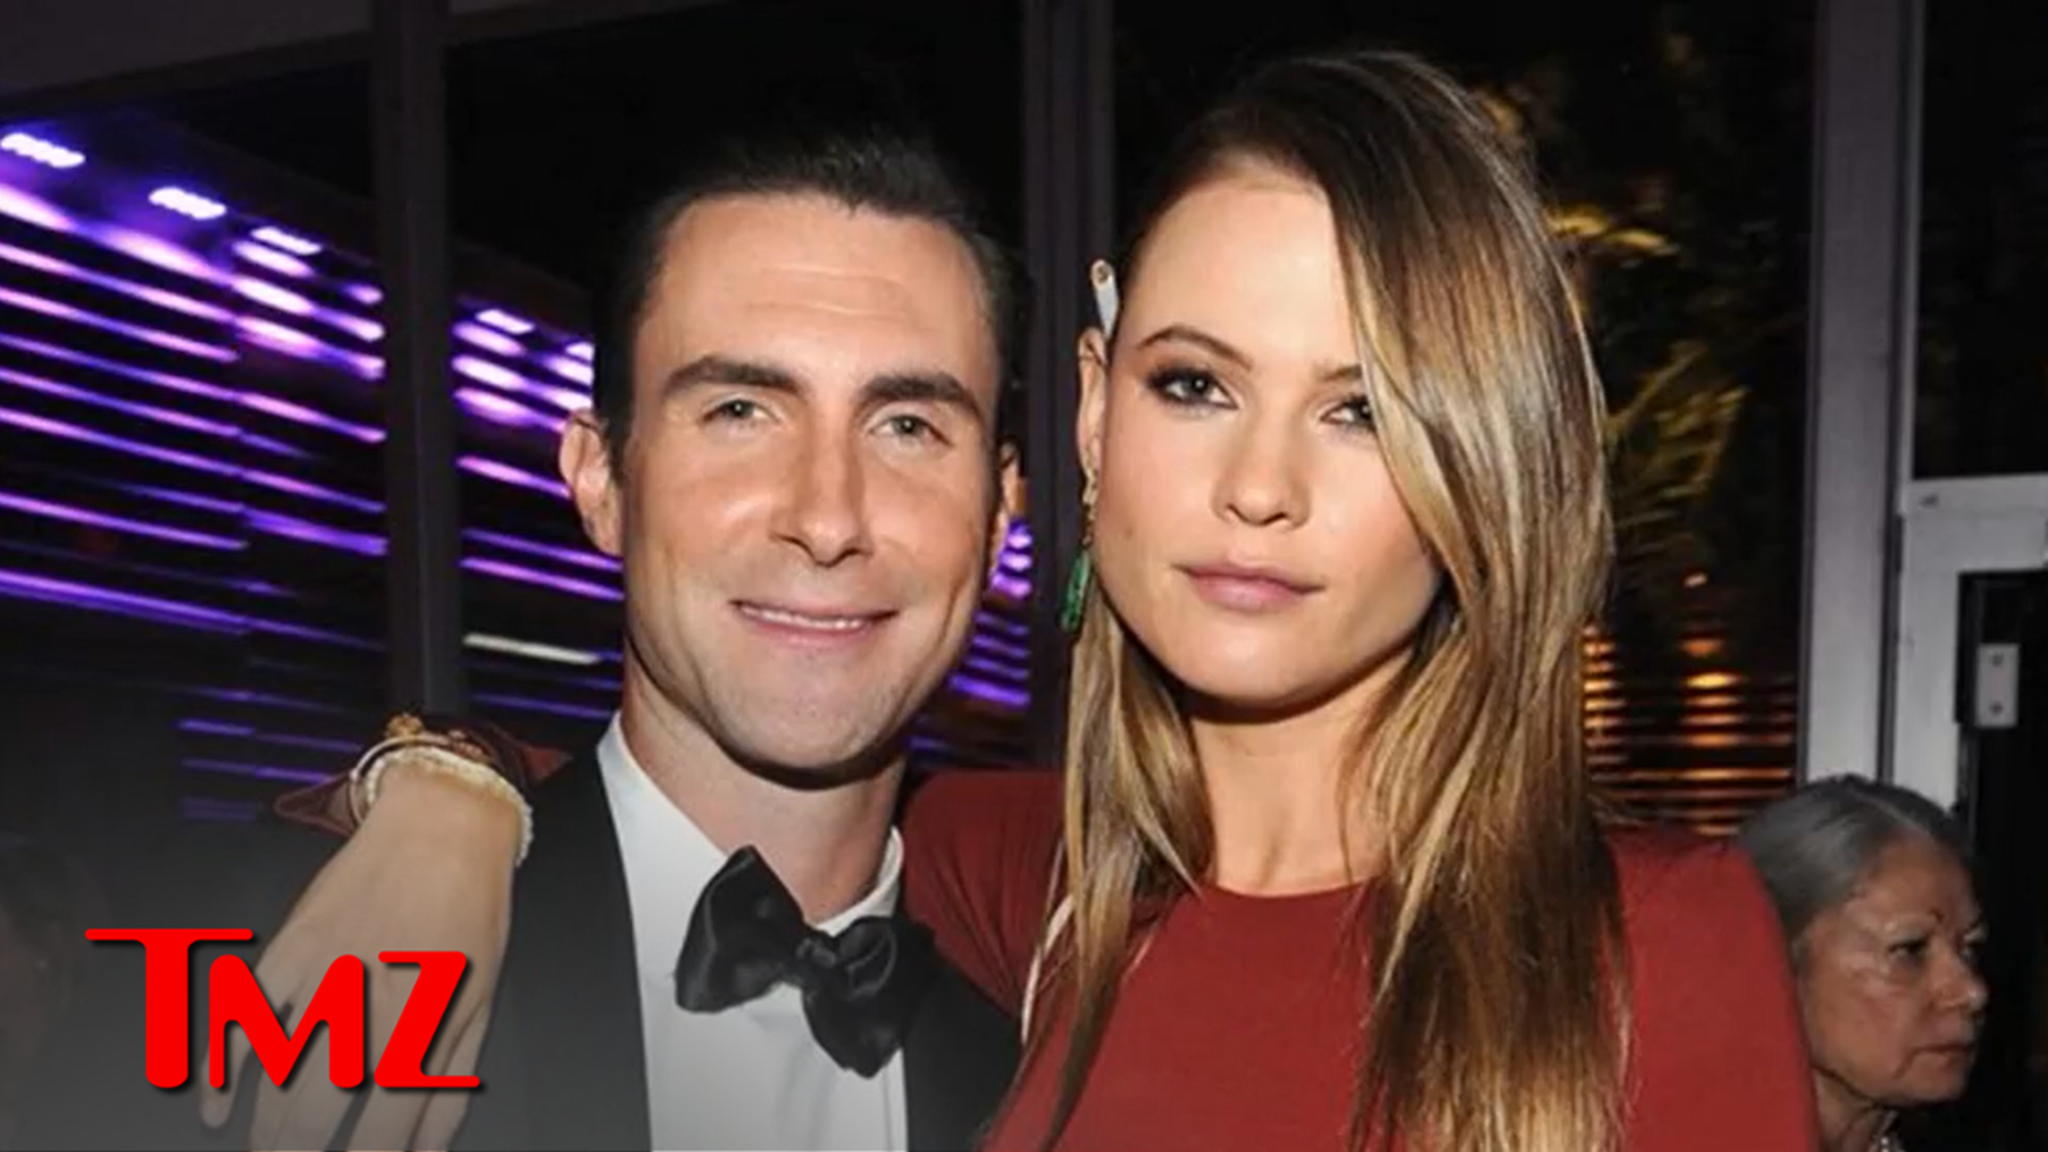 Adam Levine Says No Affair with IG Model, but He 'Crossed the Line ...